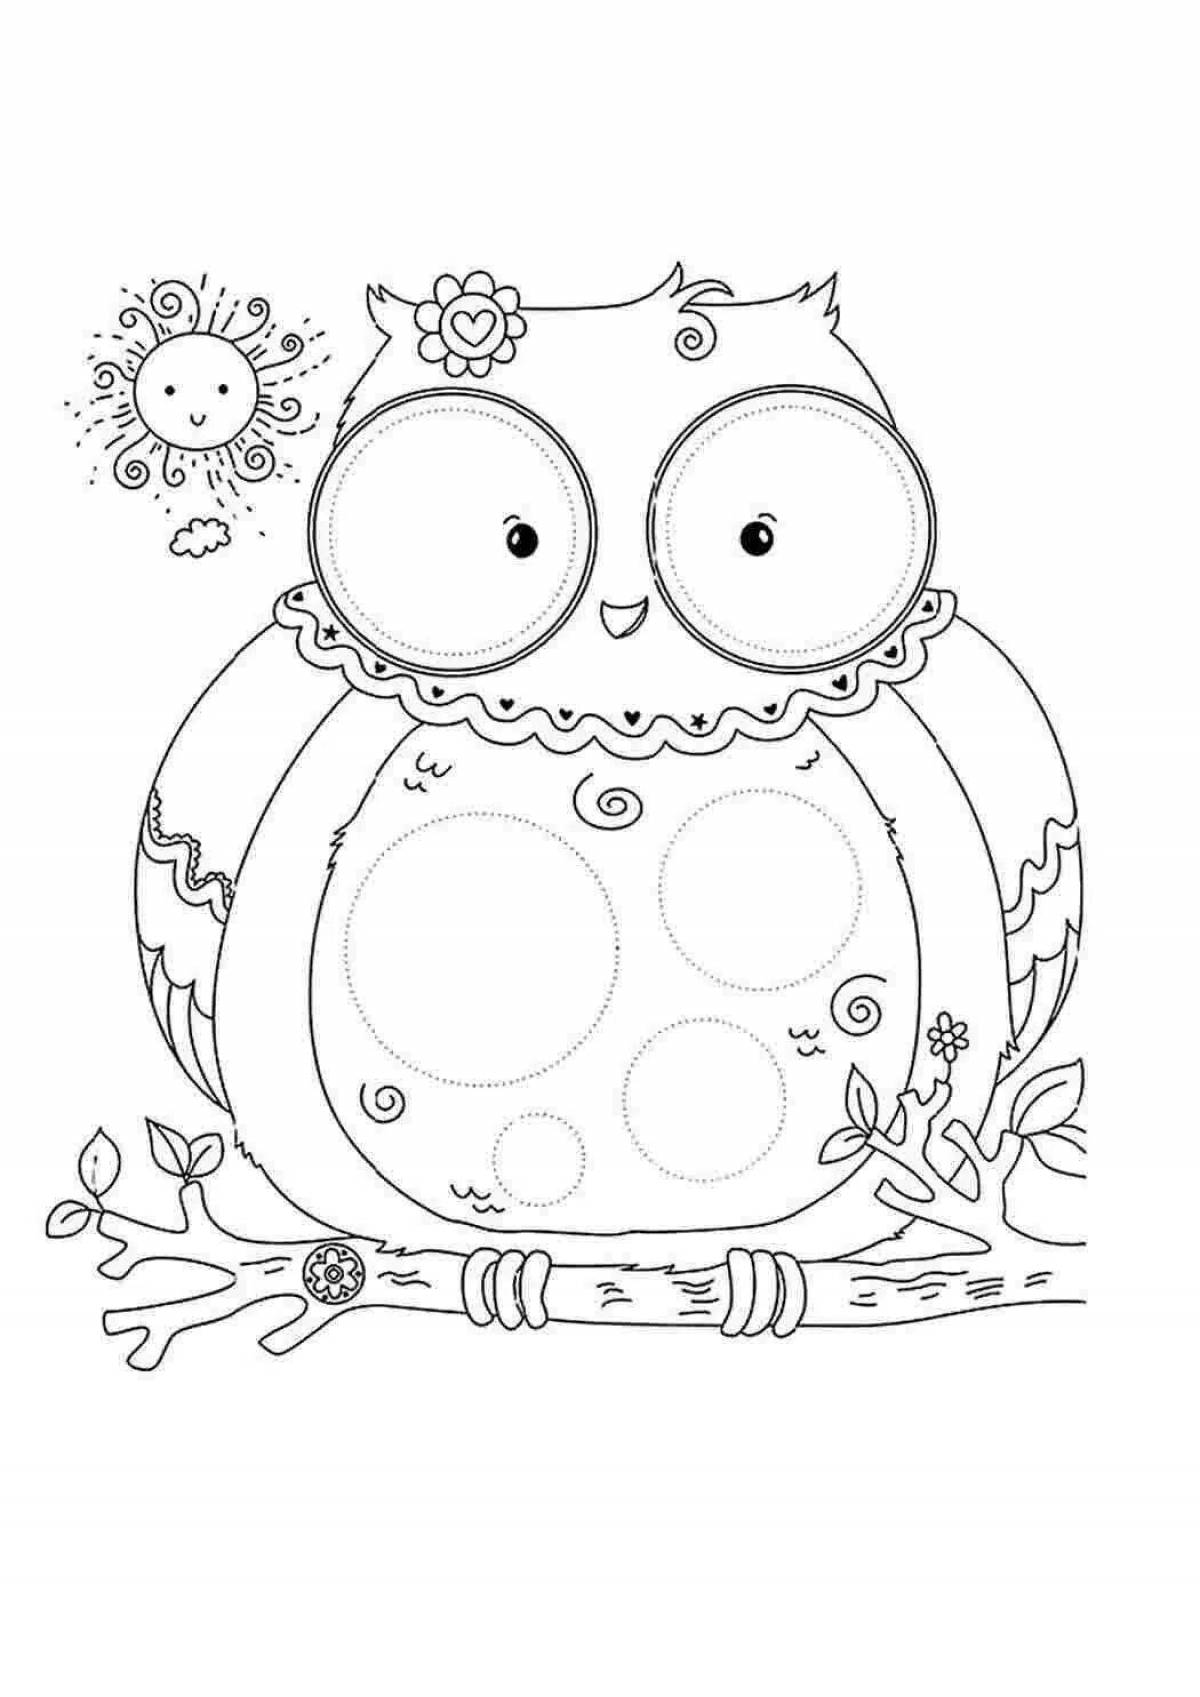 Adorable anti-stress coloring book for 5-6 year olds